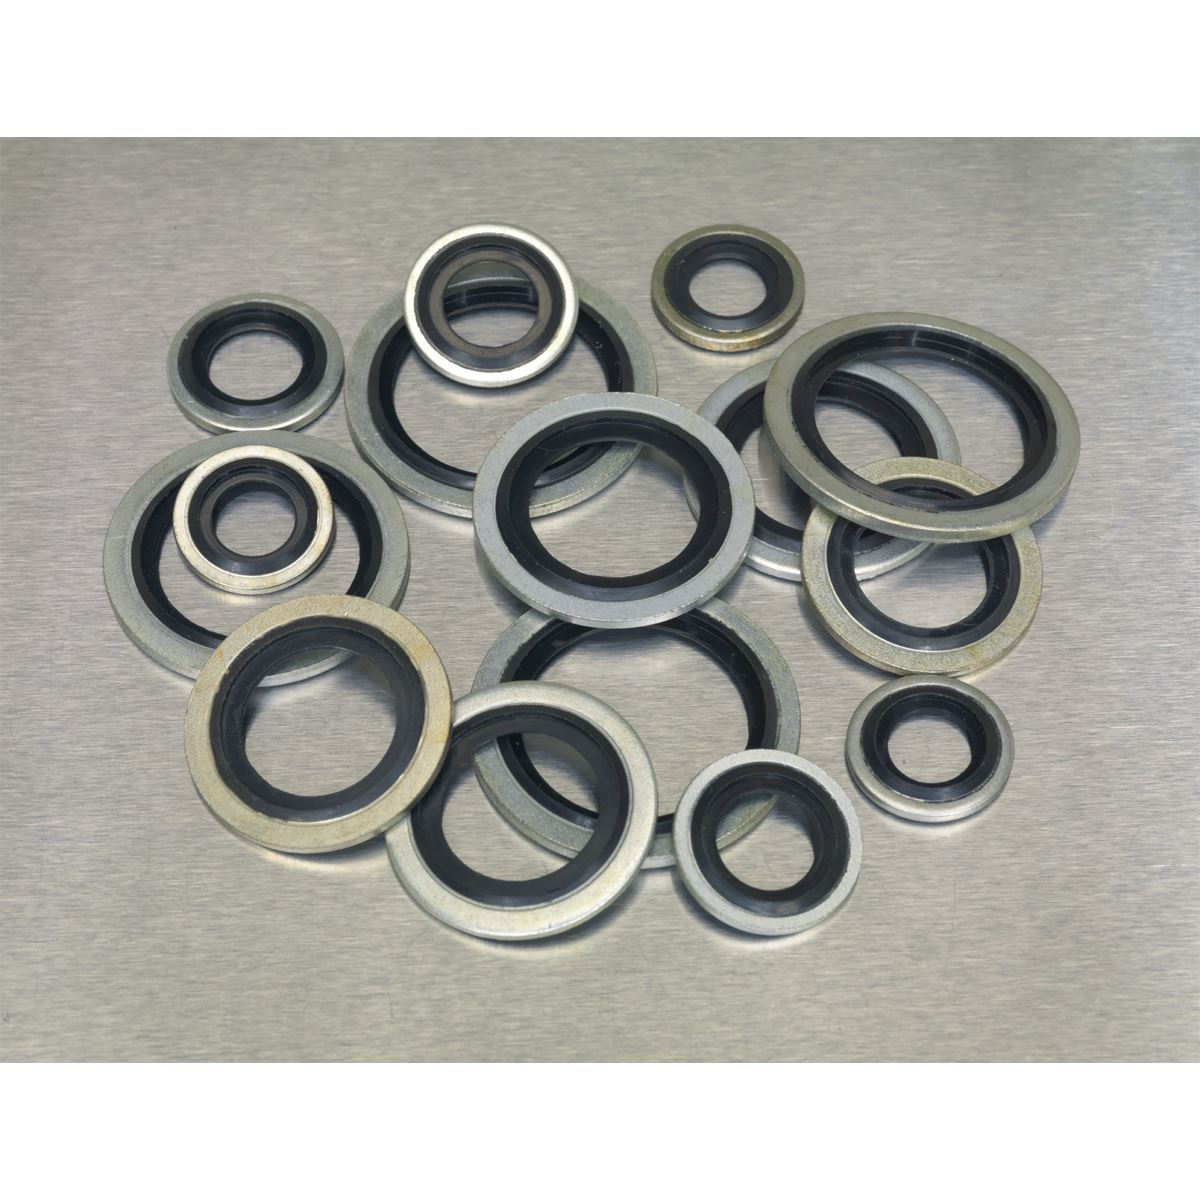 Sealey Bonded Seal (Dowty Seal) Assortment 88pc - Metric